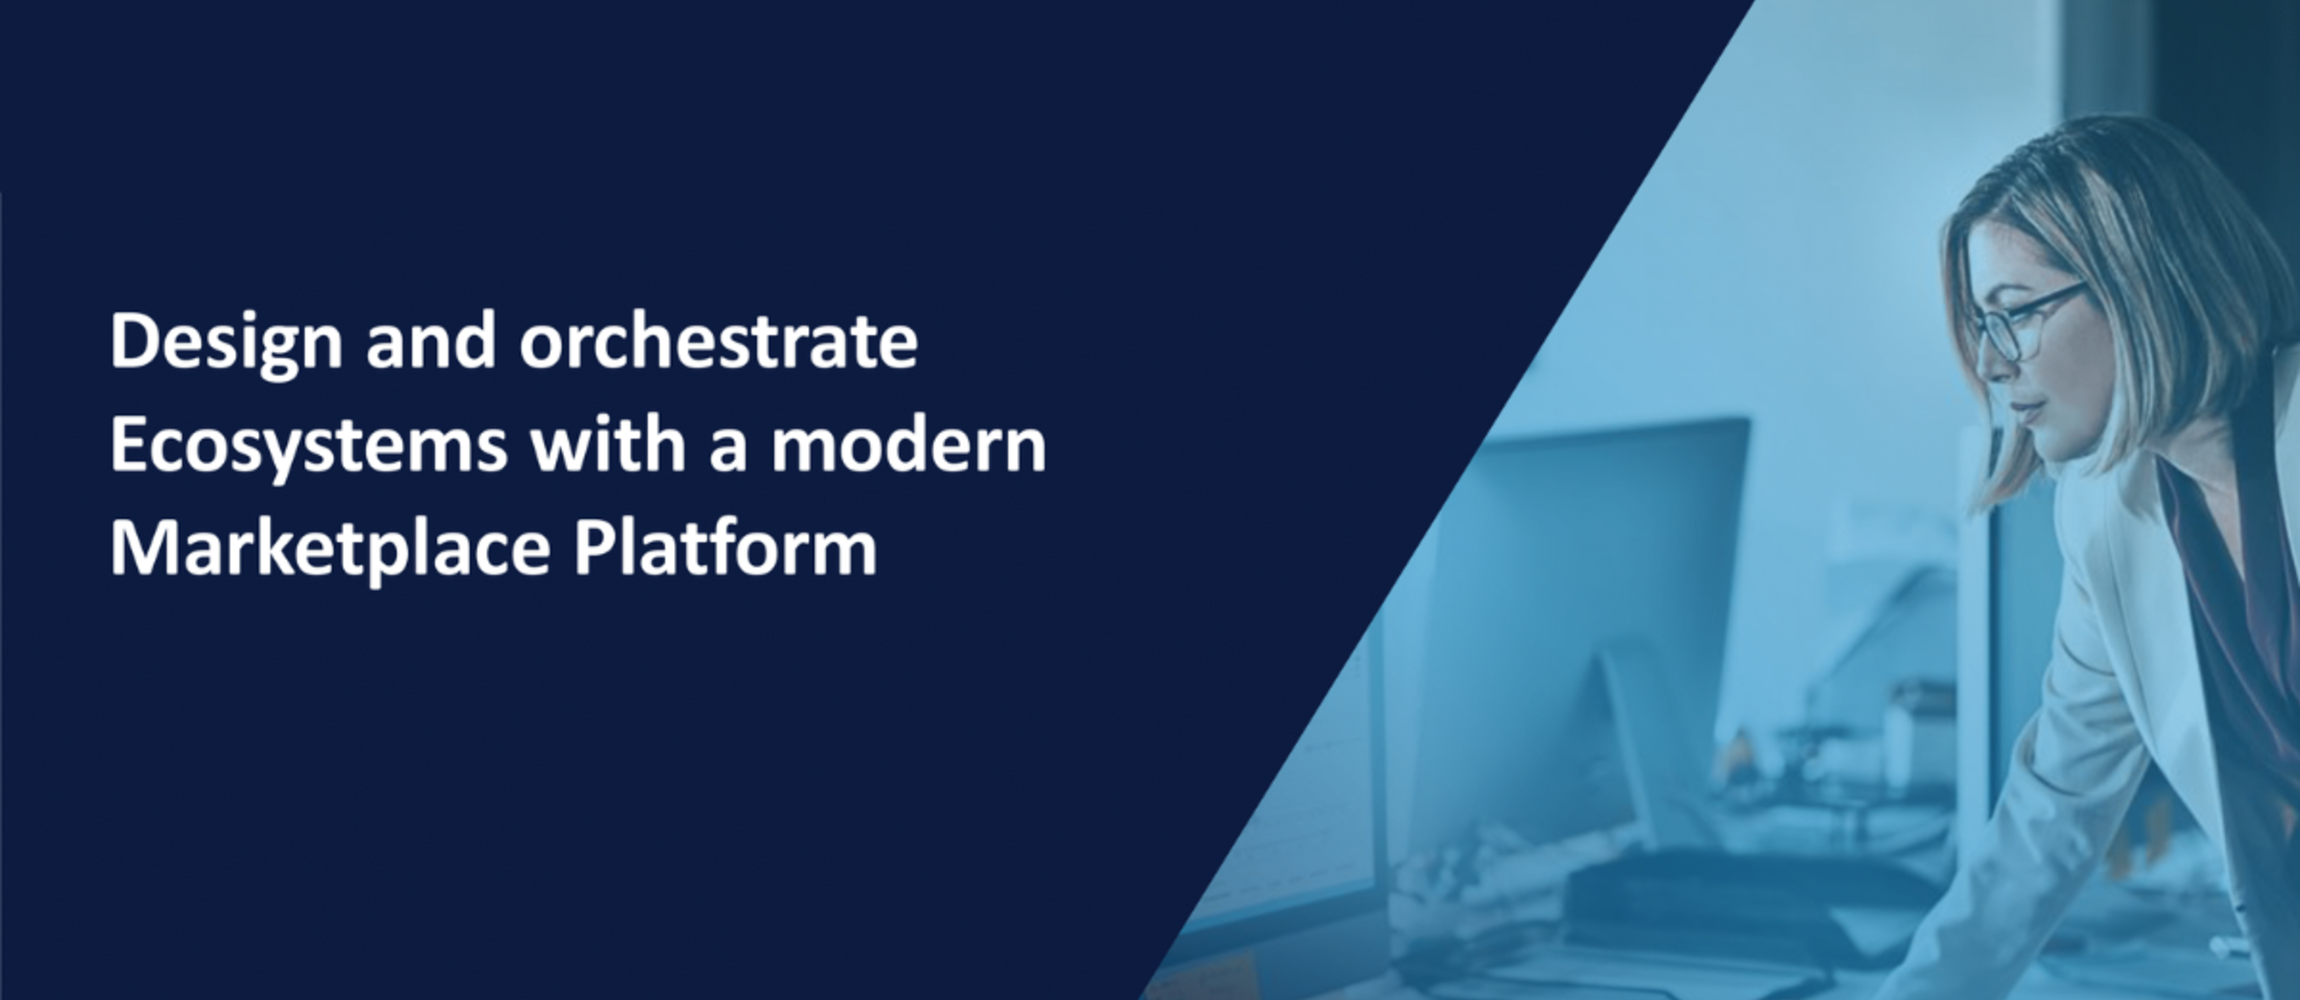 Design and orchestrate Ecosystems with a modern Marketplace Platform